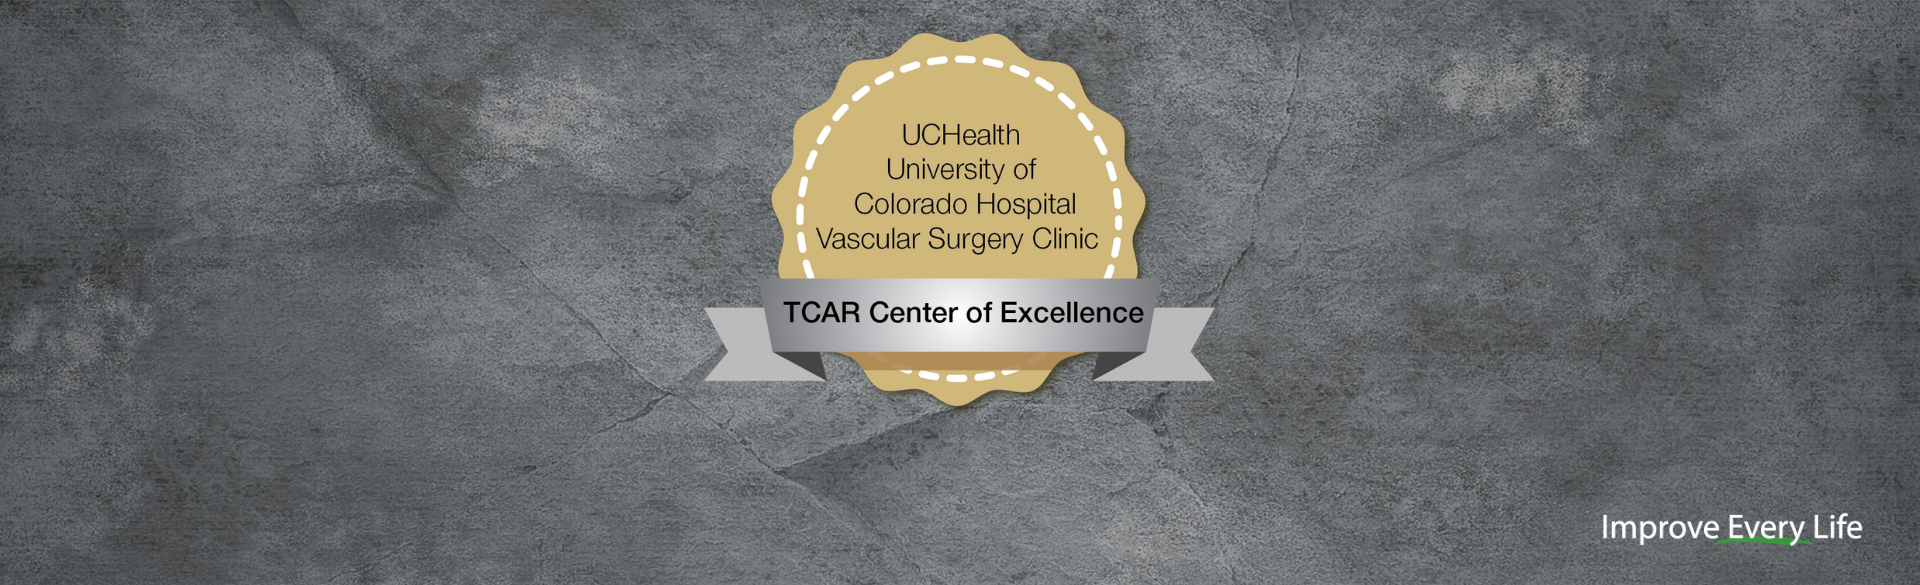 UCHealth University of Colorado Hospital Vascular Surgery Clinic has been named a TCAR Center of Excellence by Silk Road Medical.